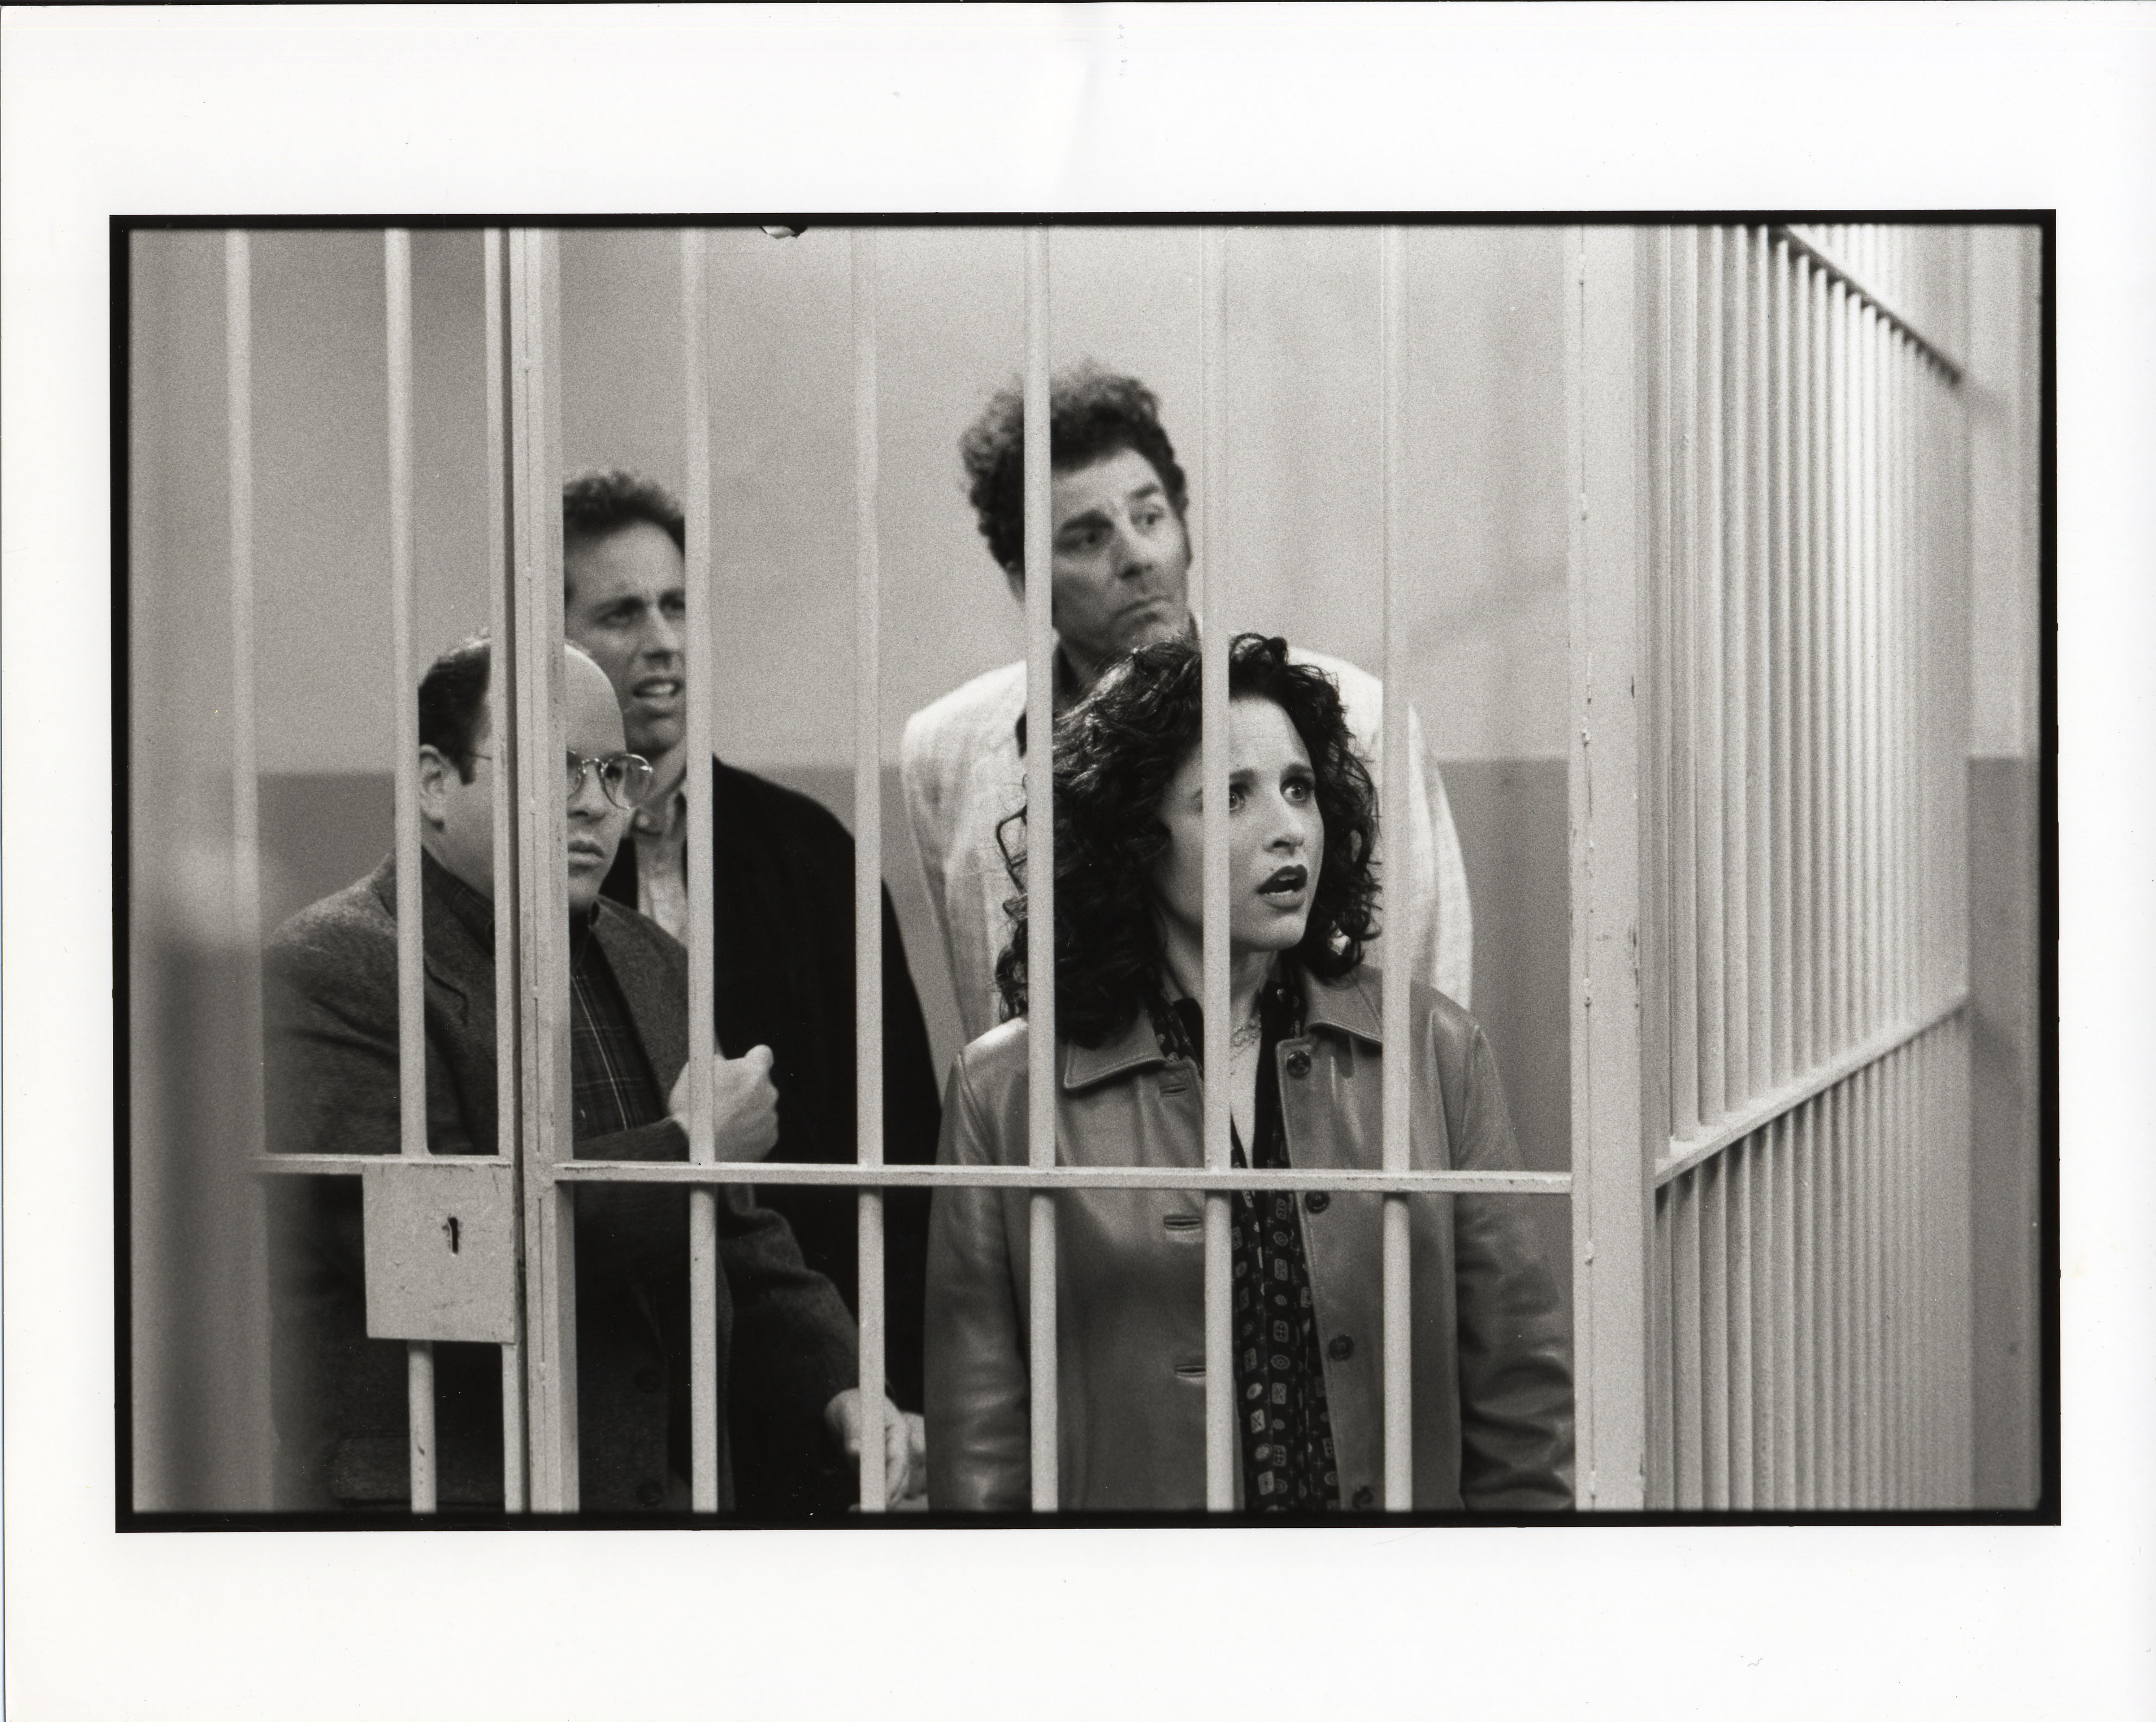 Jason Alexander (George), Jerry Seinfeld (Jerry), Michael Richards (Kramer), and Julia Louis-Dreyfus (Elaine) stand behind bars in a scene during the last days of filming the final episode of 'Seinfeld'